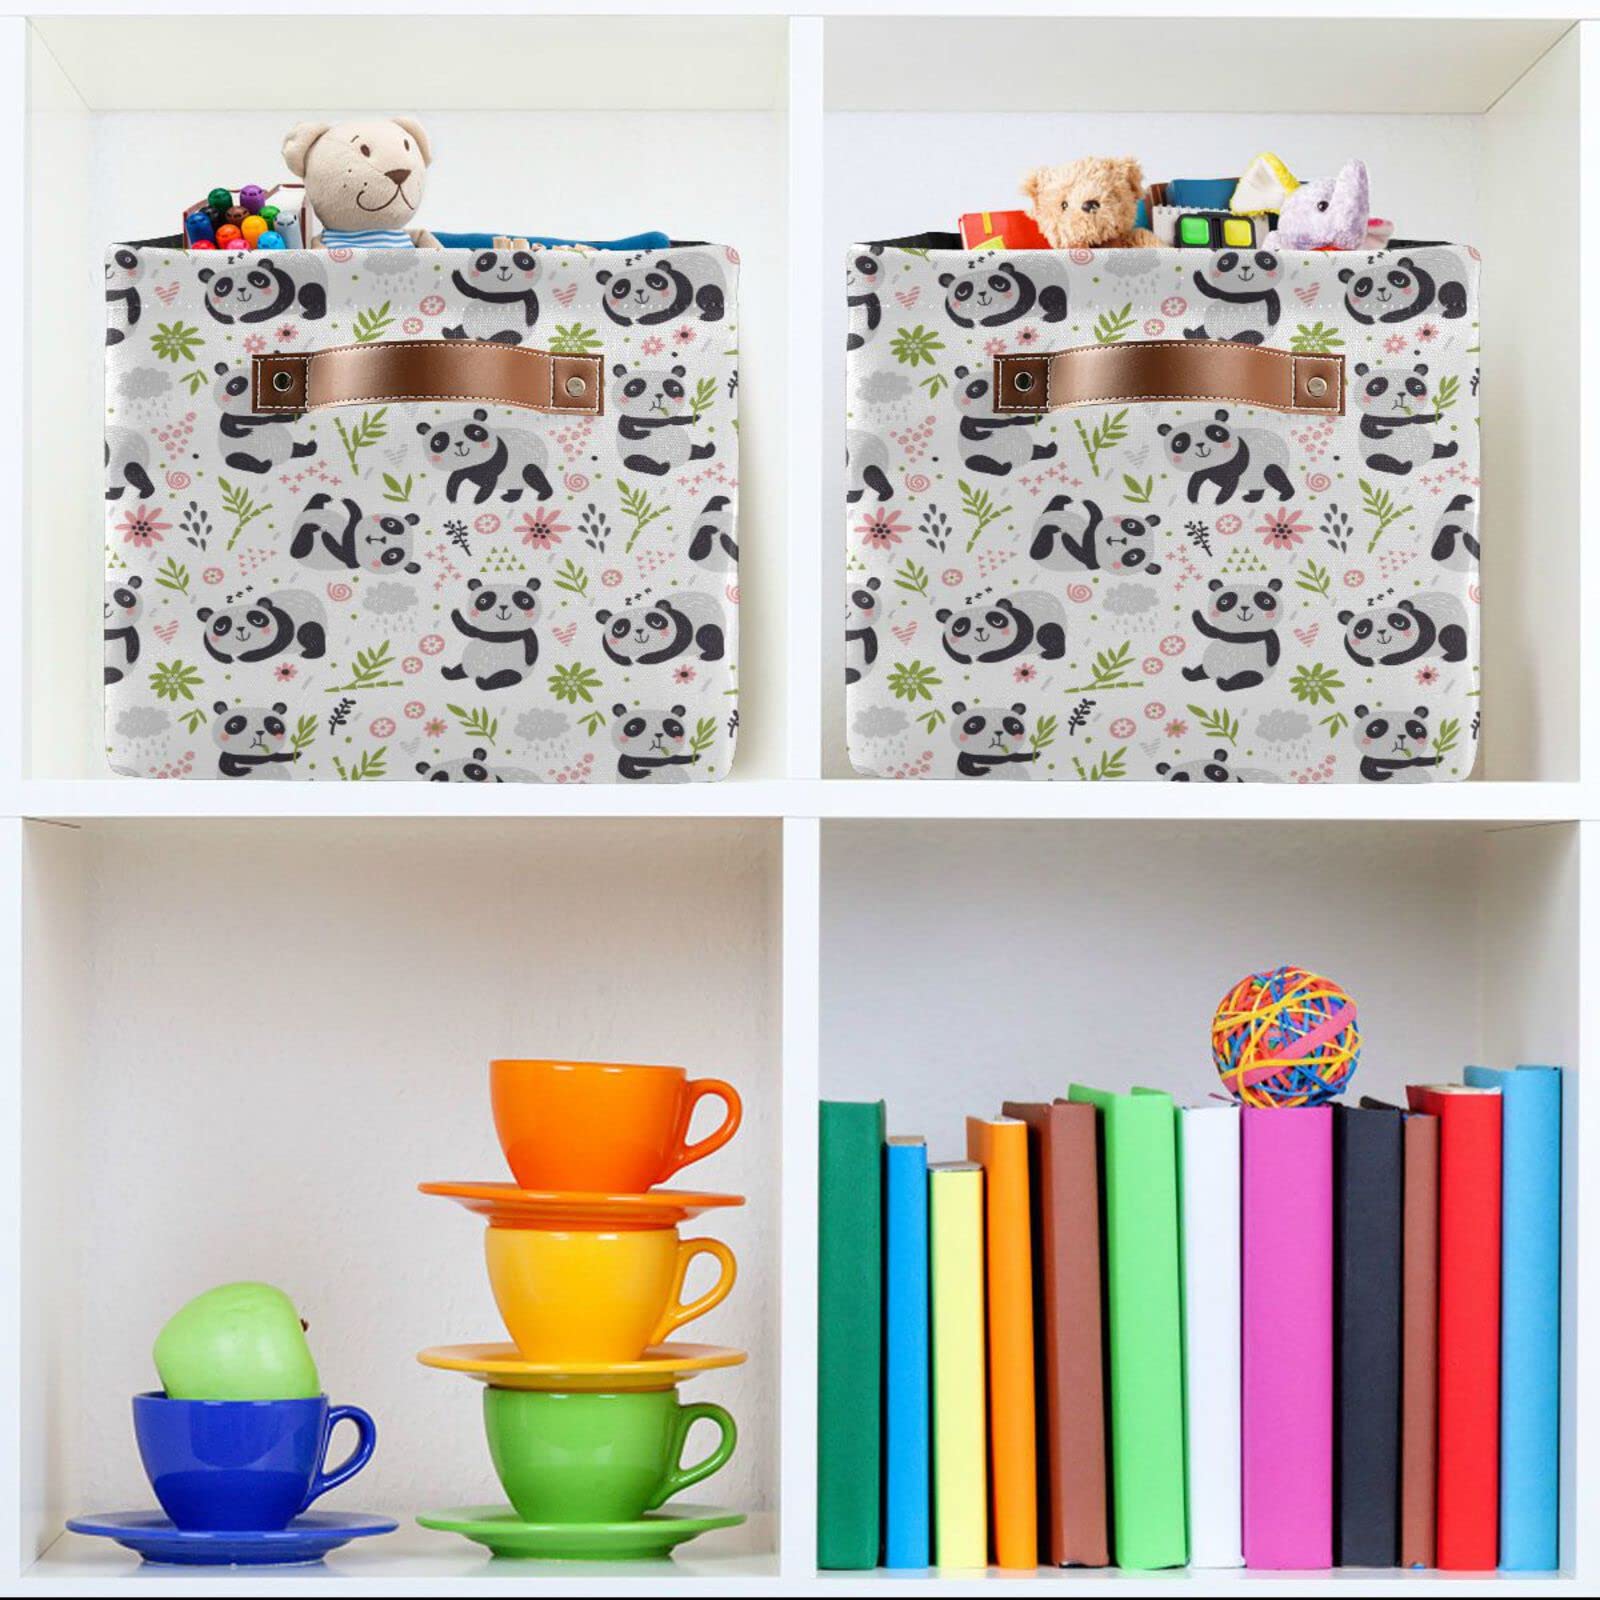 Kigai Panda Eating Bamboo Storage Baskets Rectangle Foldable Canvas Fabric Organizer Storage Boxes with Handles for Home Office Decorative Closet Shelves Clothes Storage